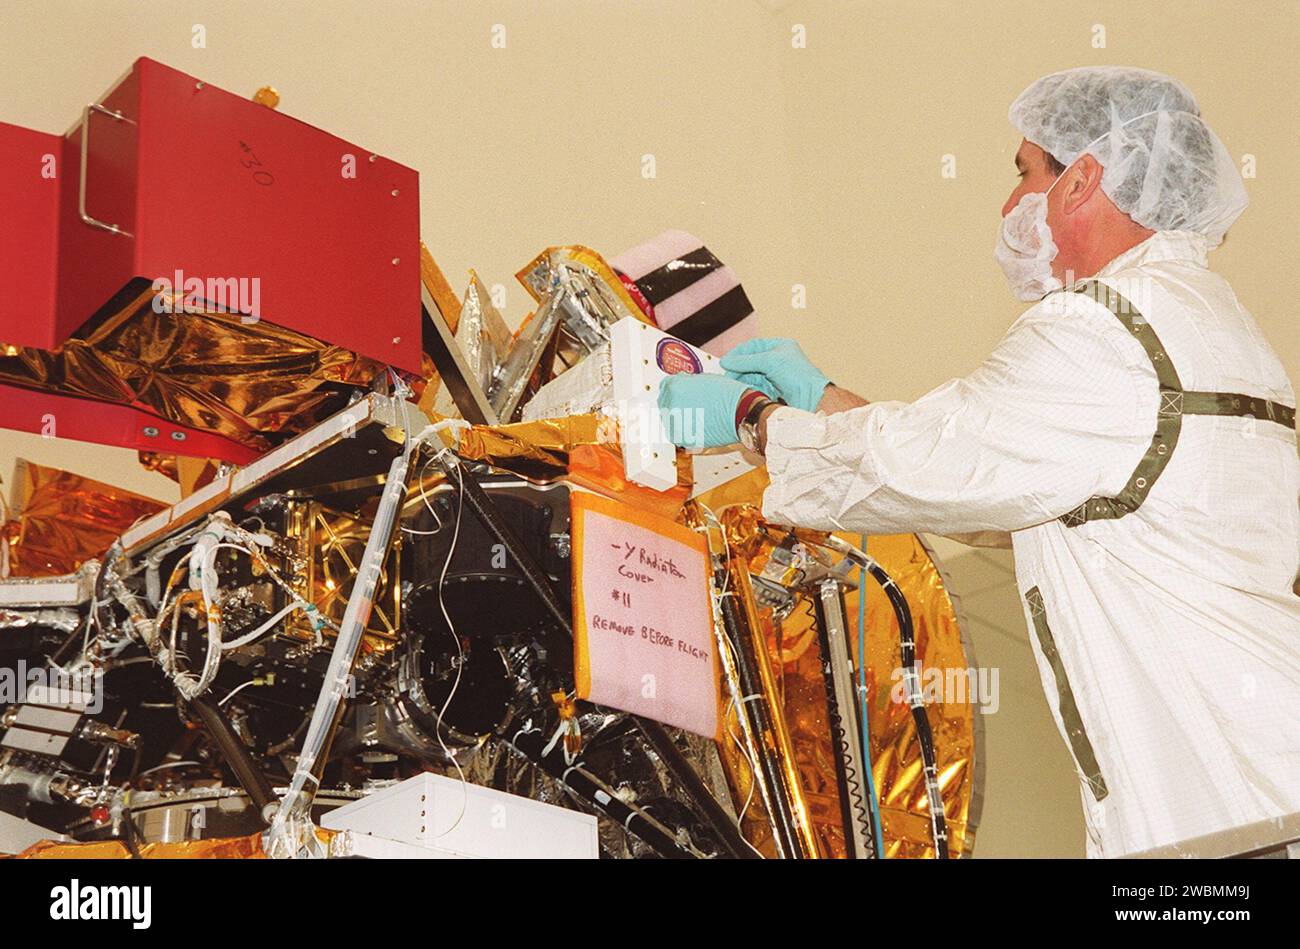 In the Spacecraft Assembly and Encapsulation Facility 2 (SAEF-2), a worker removes the High Energy Neutron Detector (HEND), part of the Gamma Ray Spectrometer (GRS), from the 2001 Mars Odyssey Orbiter. The HEND was built by Russia’s Space Research Institute (IKI). The GRS will achieve global mapping of the elemental composition of the surface and determine the abundance of hydrogen in the shallow subsurface. The orbiter will carry two other science instruments THEMIS and the Mars Radiation Environment Experiment (MARIE). THEMIS will map the mineralogy and morphology of the Martian surface usin Stock Photo